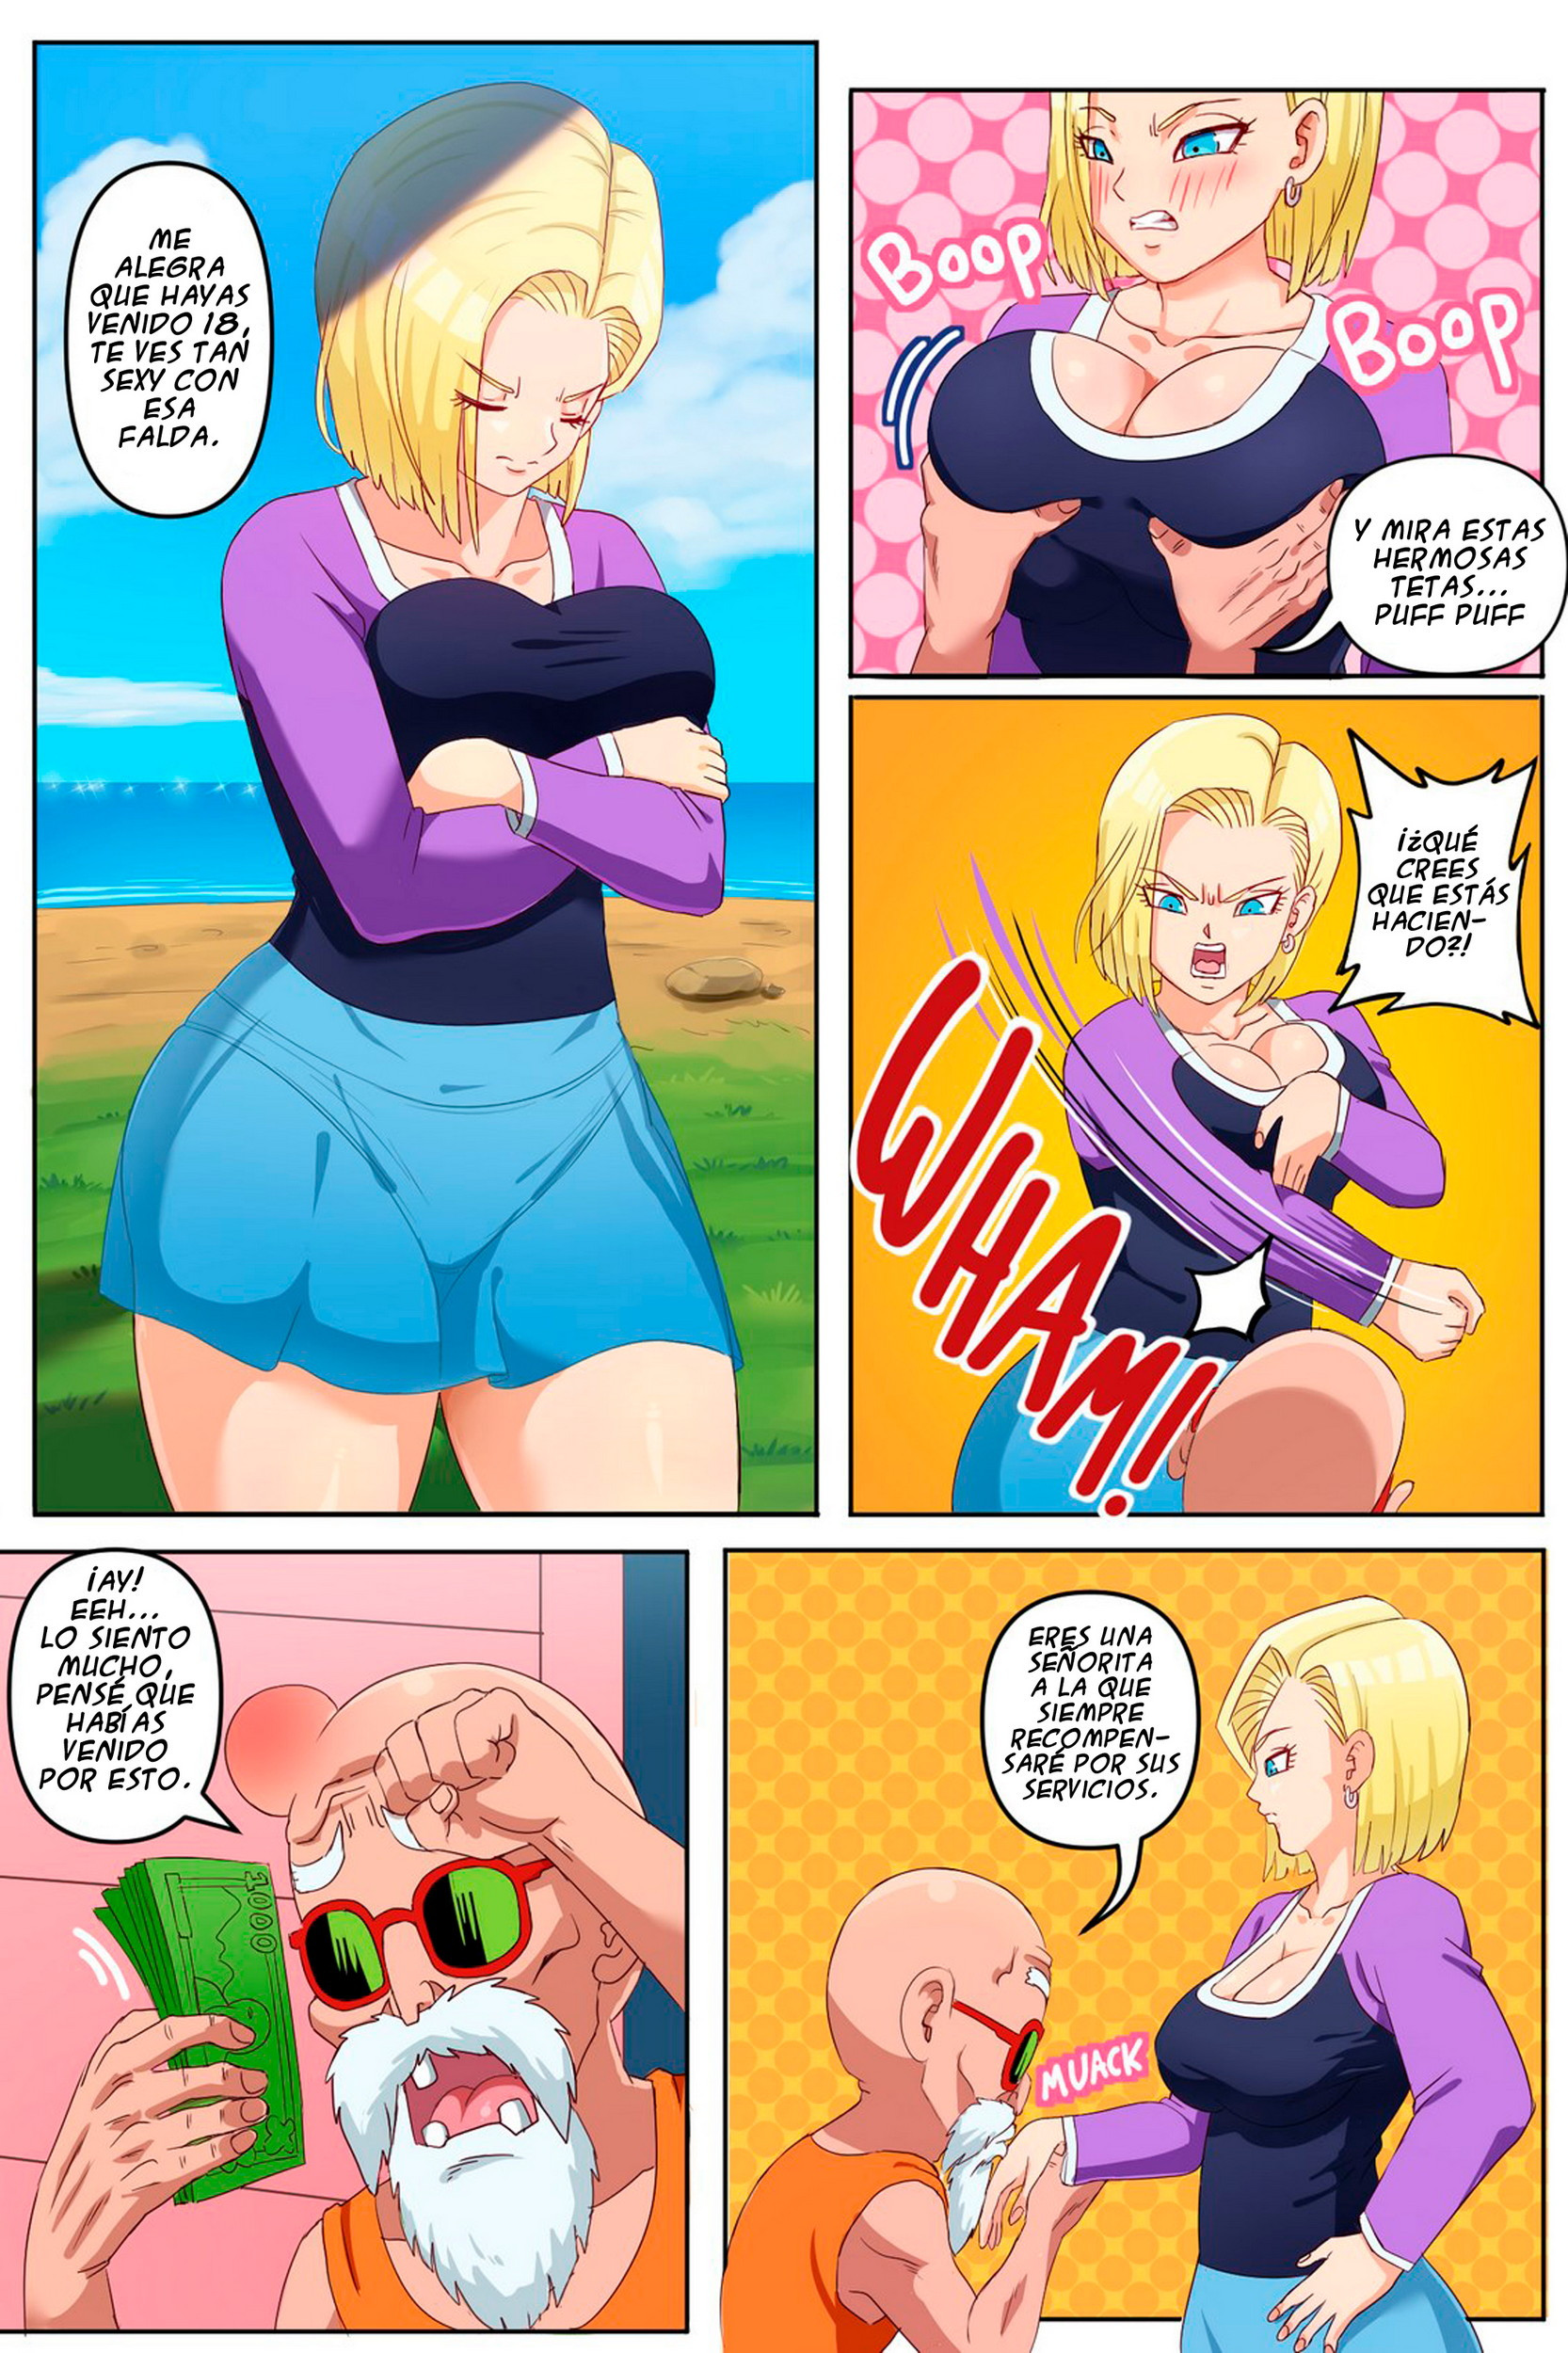 [Pink Pawg] Android 18 NTR Ep.1 - 2